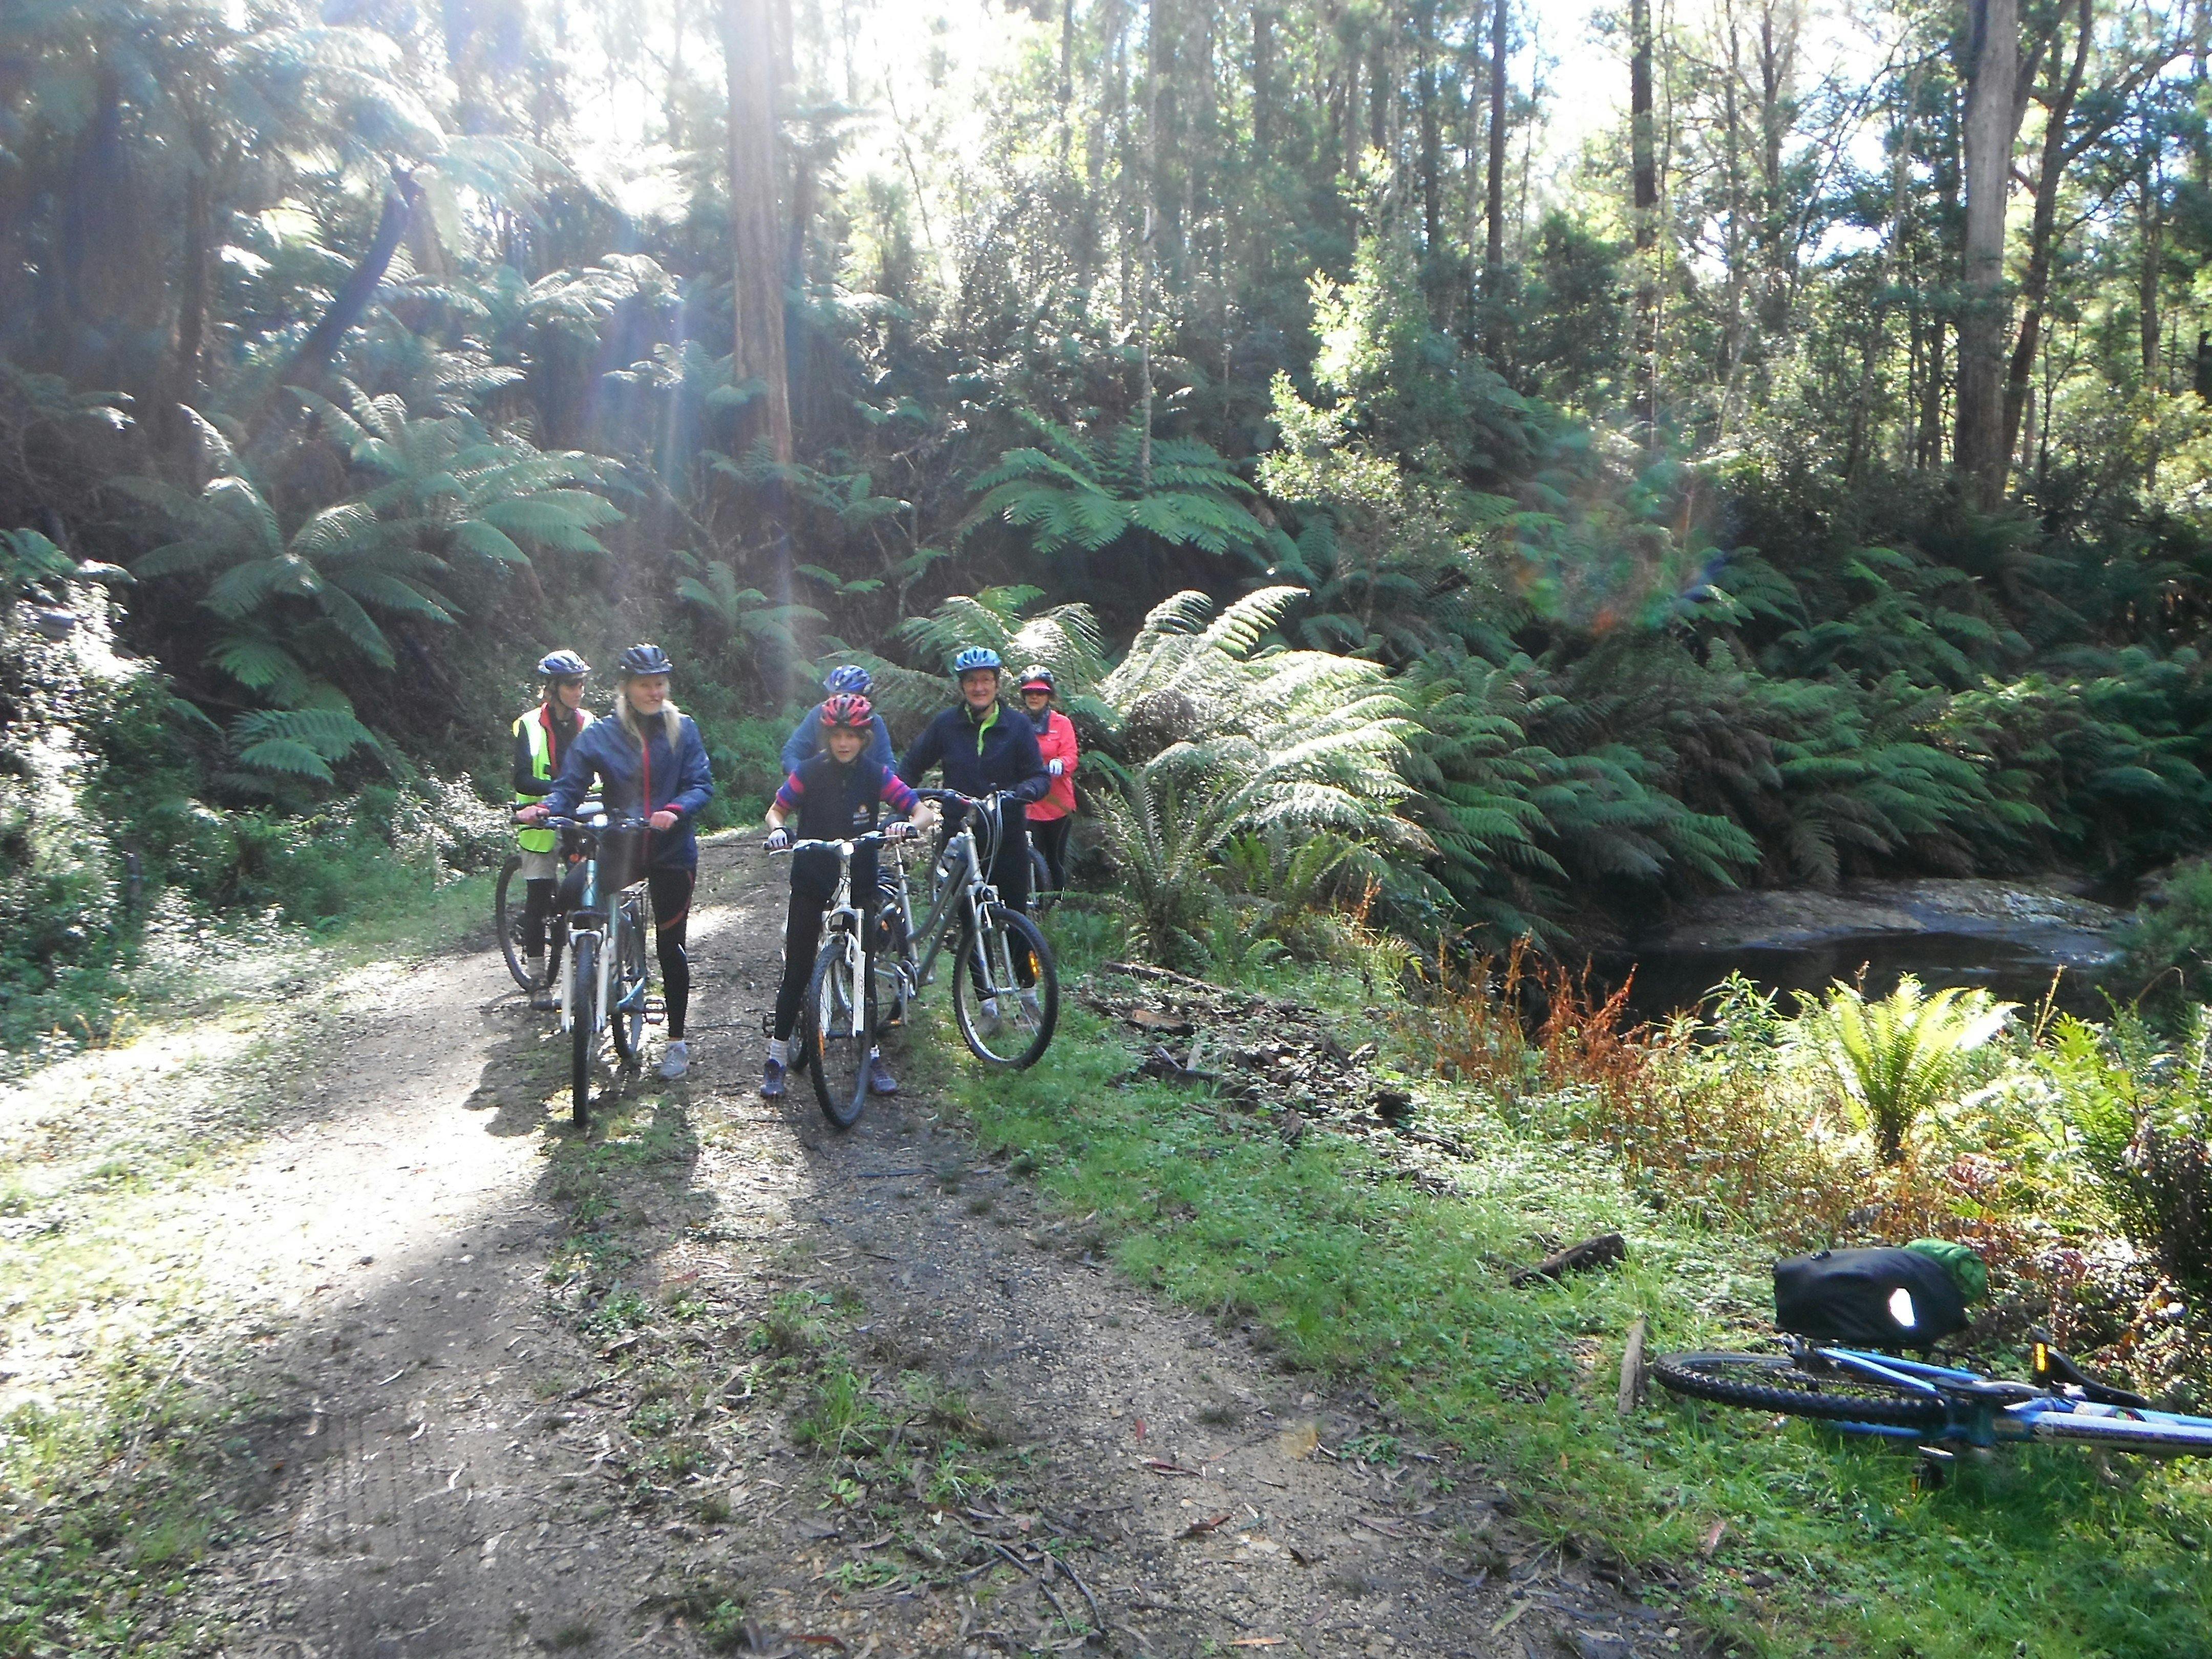 Snowy River Cycling